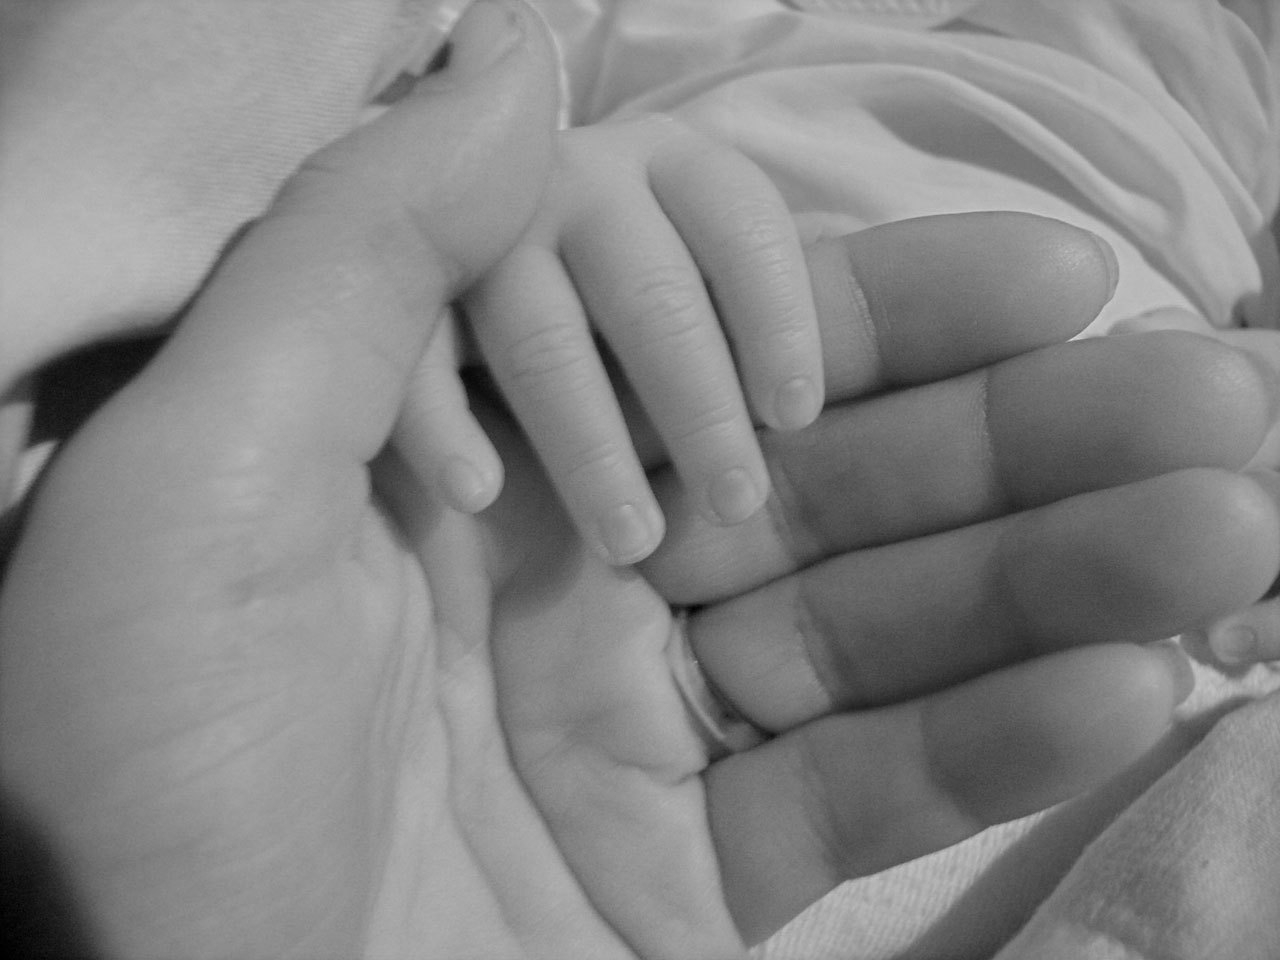 Black and white image of a baby's hand wrapped around the mother's index finger, middle finger, and palm.